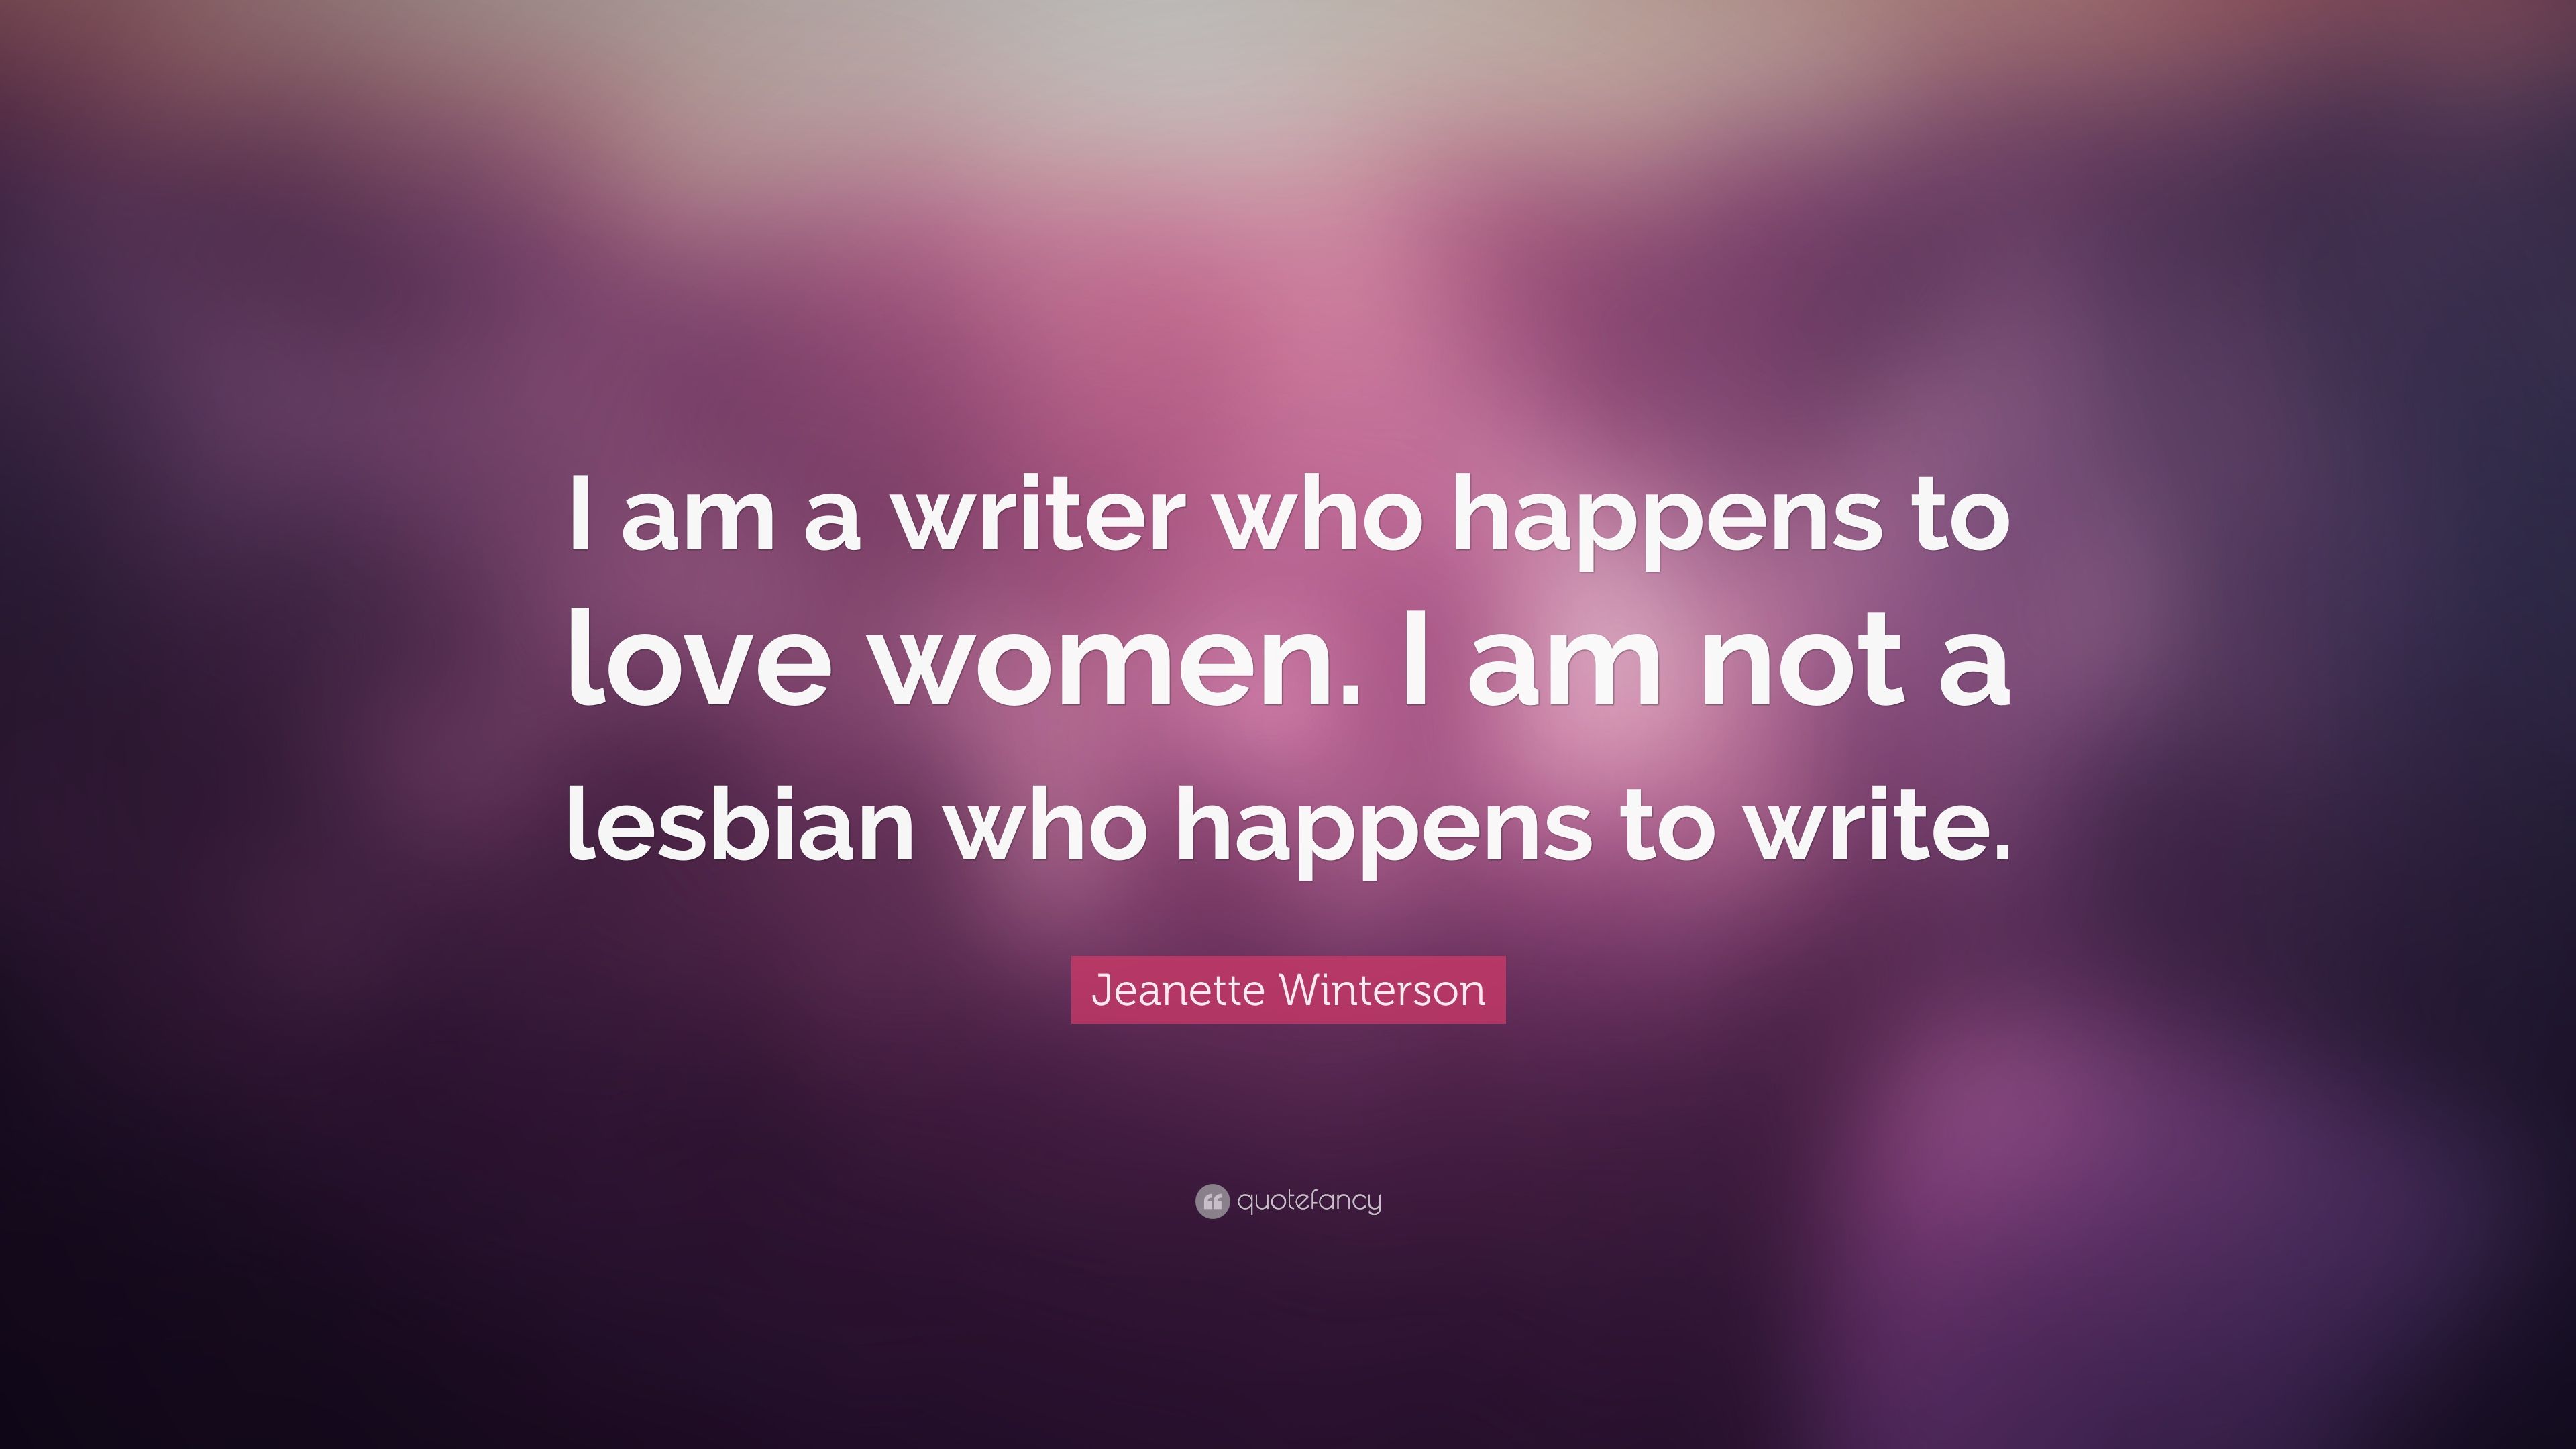 Jeanette Winterson Quote: “I am a writer who happens to love women